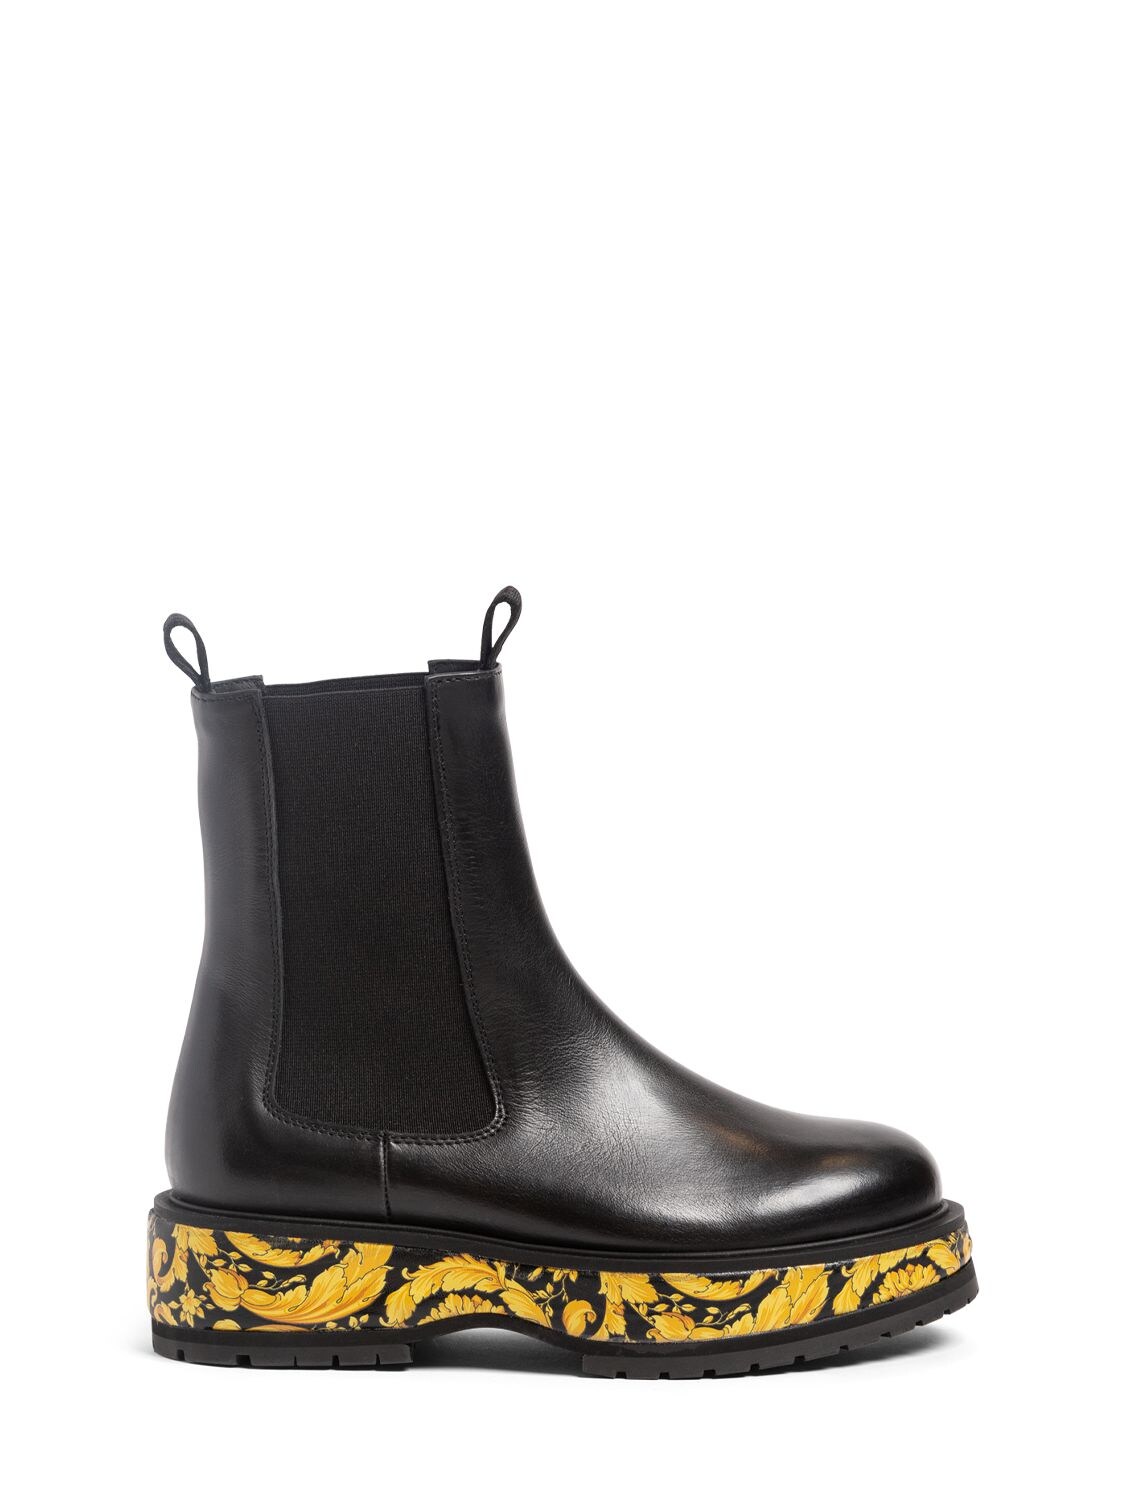 Baroque Print Leather Boots